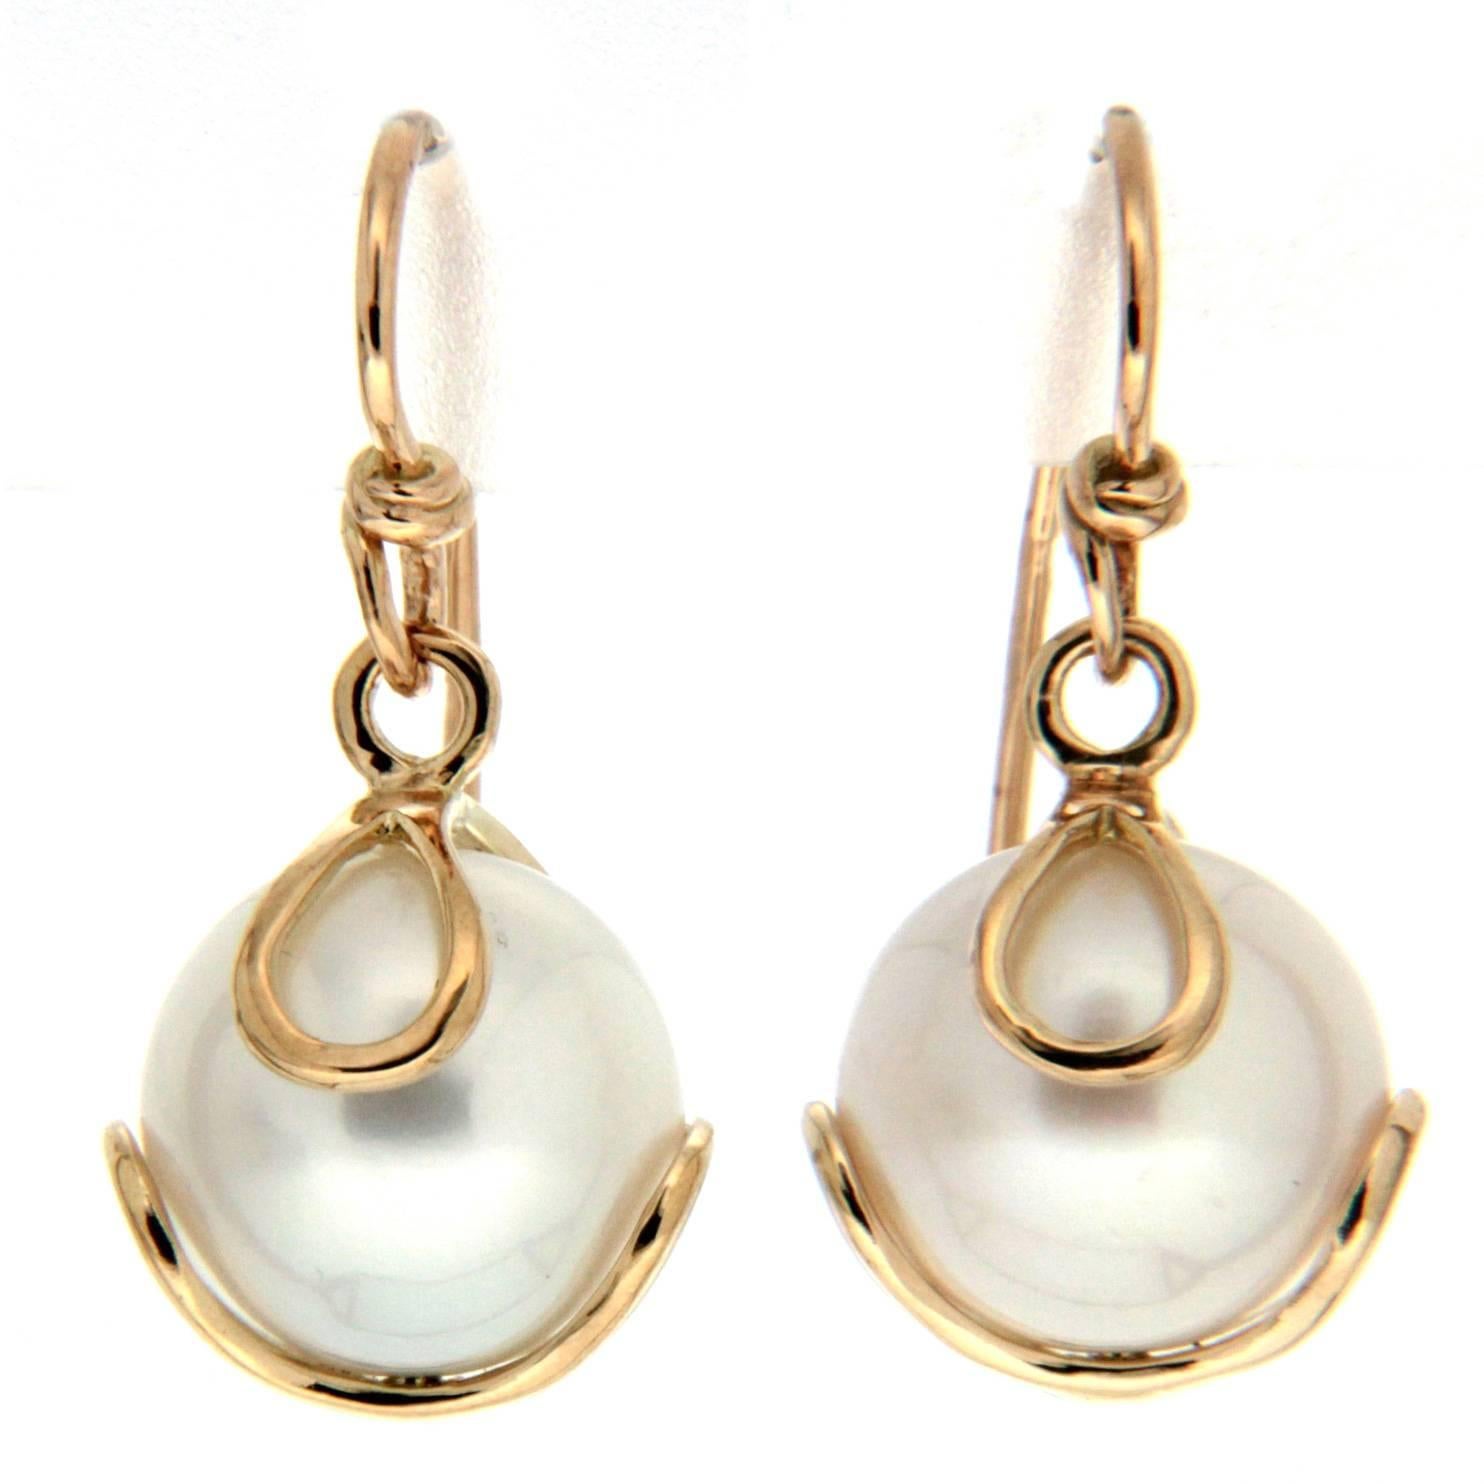 These elegant earrings are made in 18kt yellow gold, with a fresh water pearl drop and french wires.